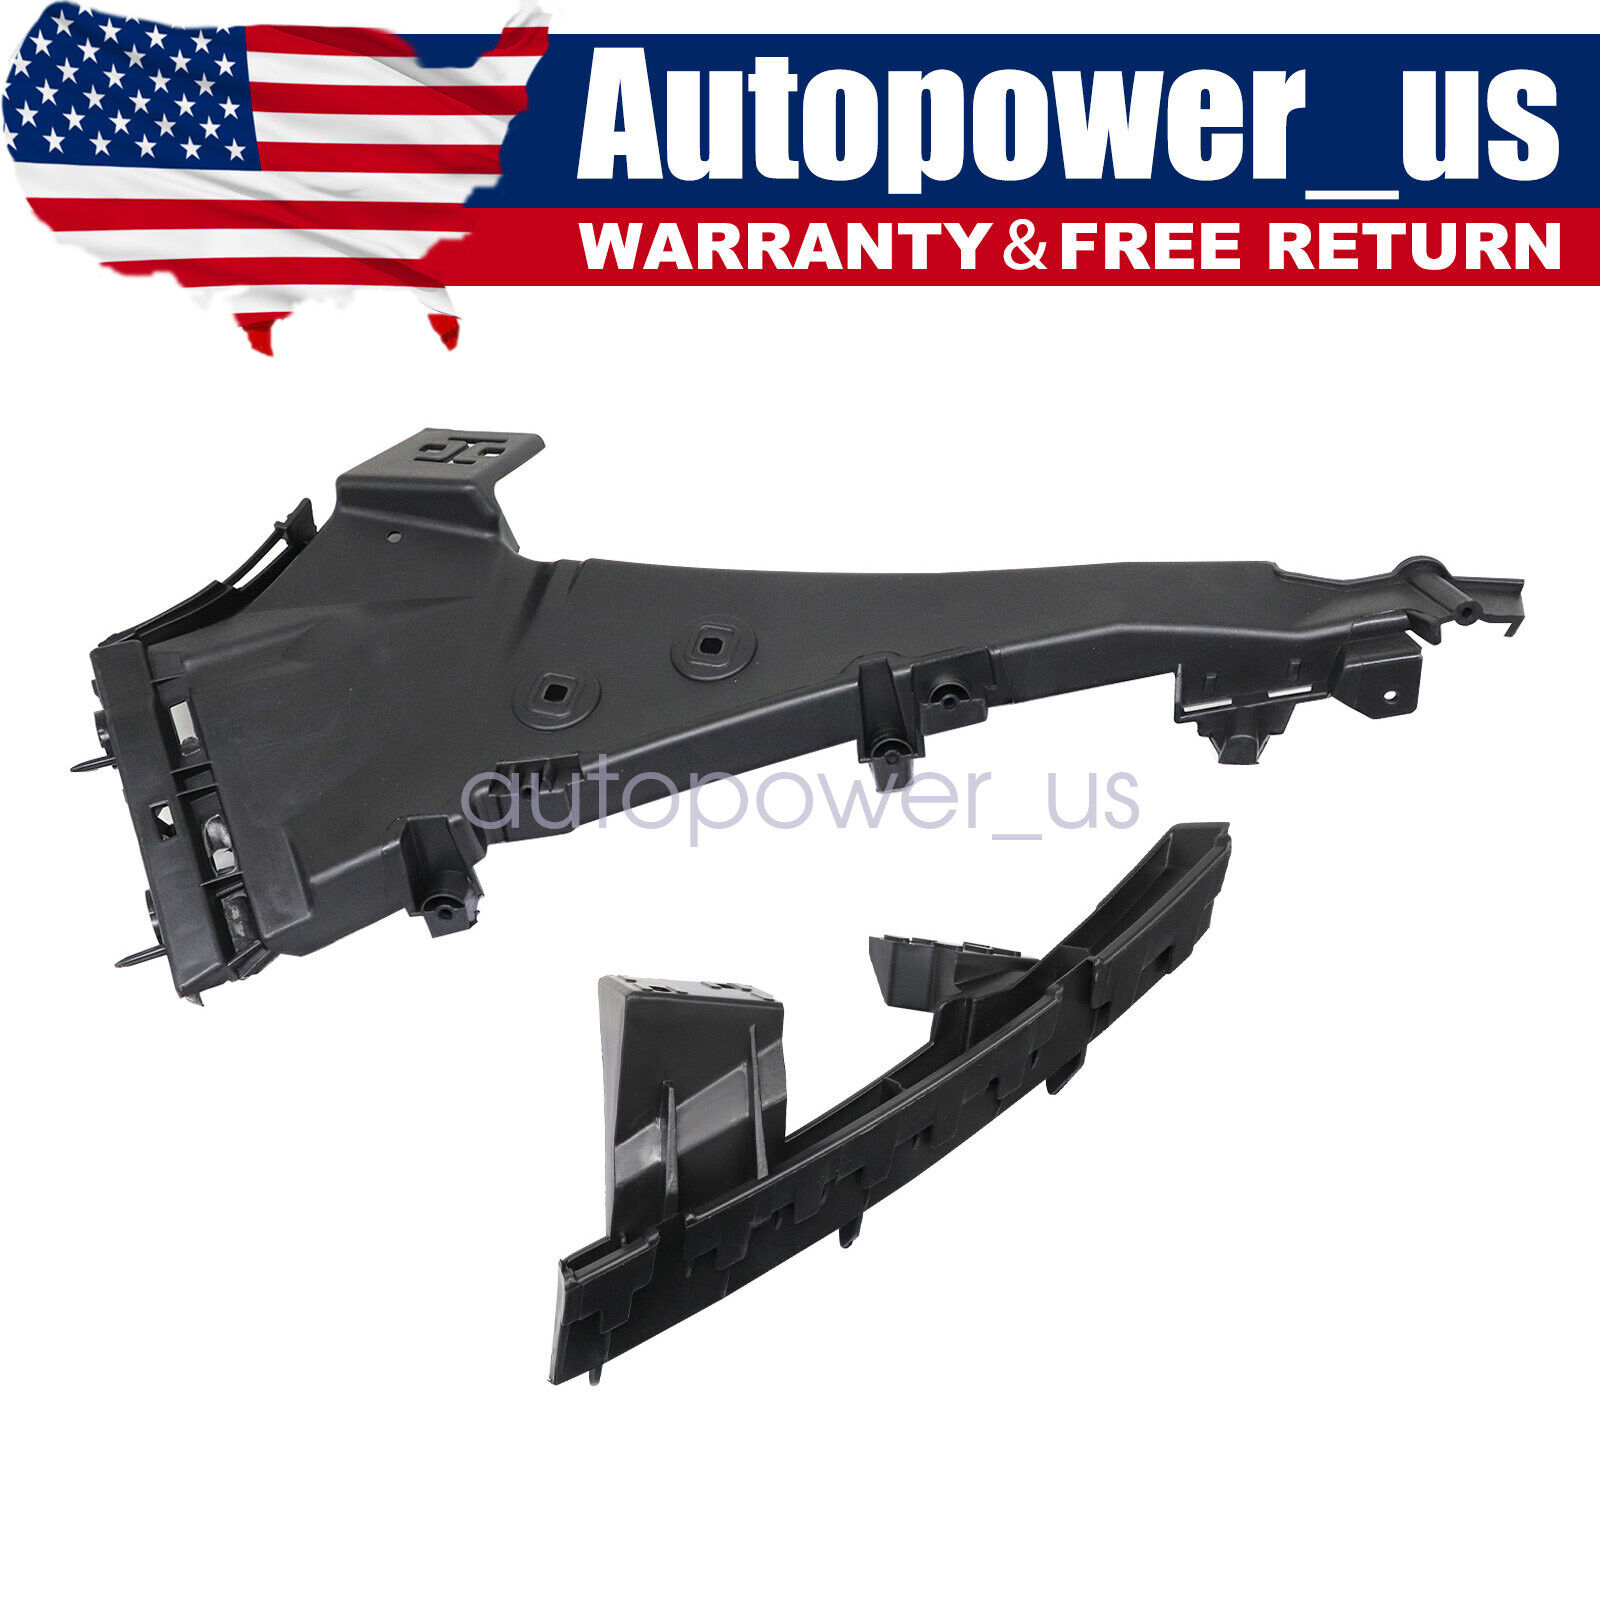 2x Front Bumper Brackets Guide Retainer Support For Audi Q7 2007-2015 US